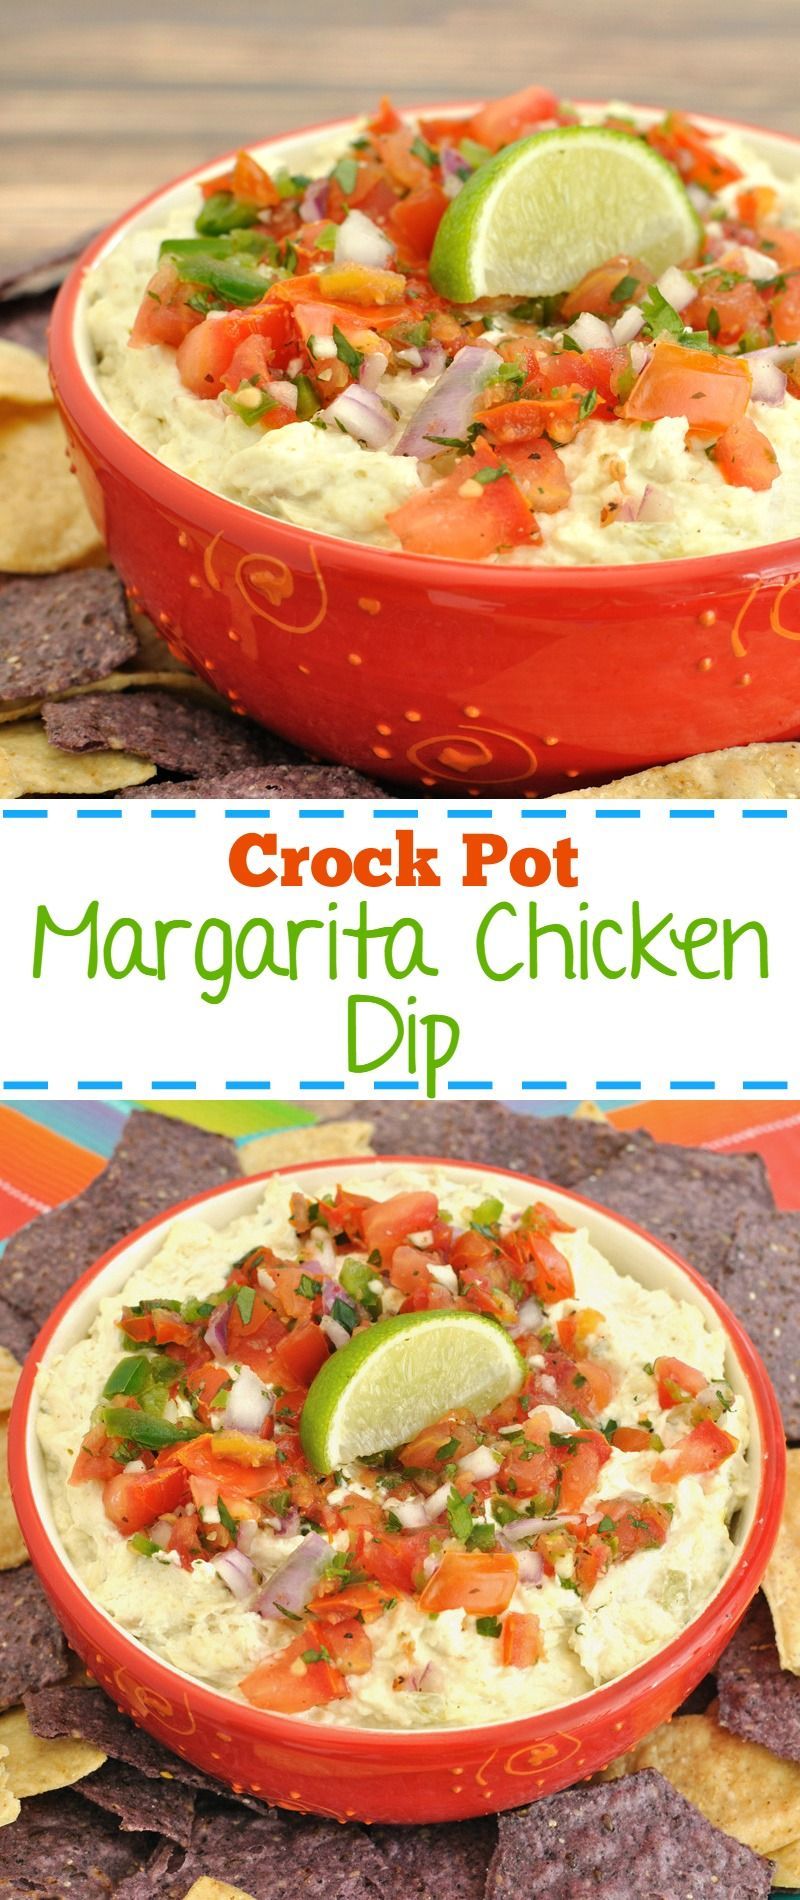 Easy slow cooker chicken dip recipe. This Crock Pot Margarita Chicken Dip will be a great appetizer for Cinco de Mayo or summer